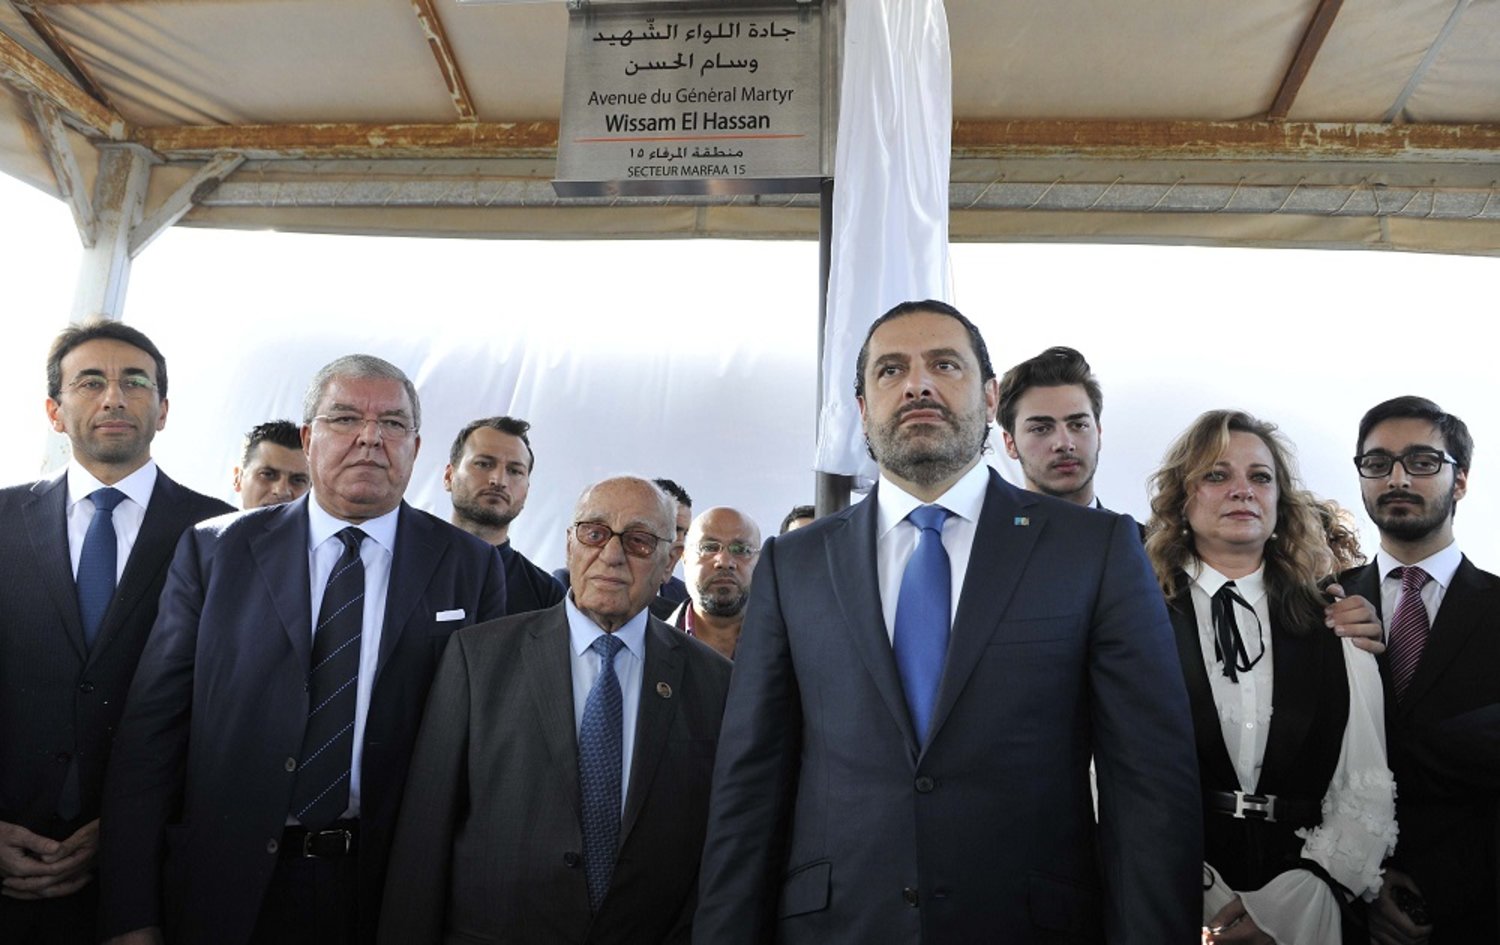 Lebanese Prime Minister Saad Hariri at a ceremony unveiling a street bearing the name of late ISF Intelligence Bureau chief Wissam al-Hassan in Beirut. (Dalati & Nohra)